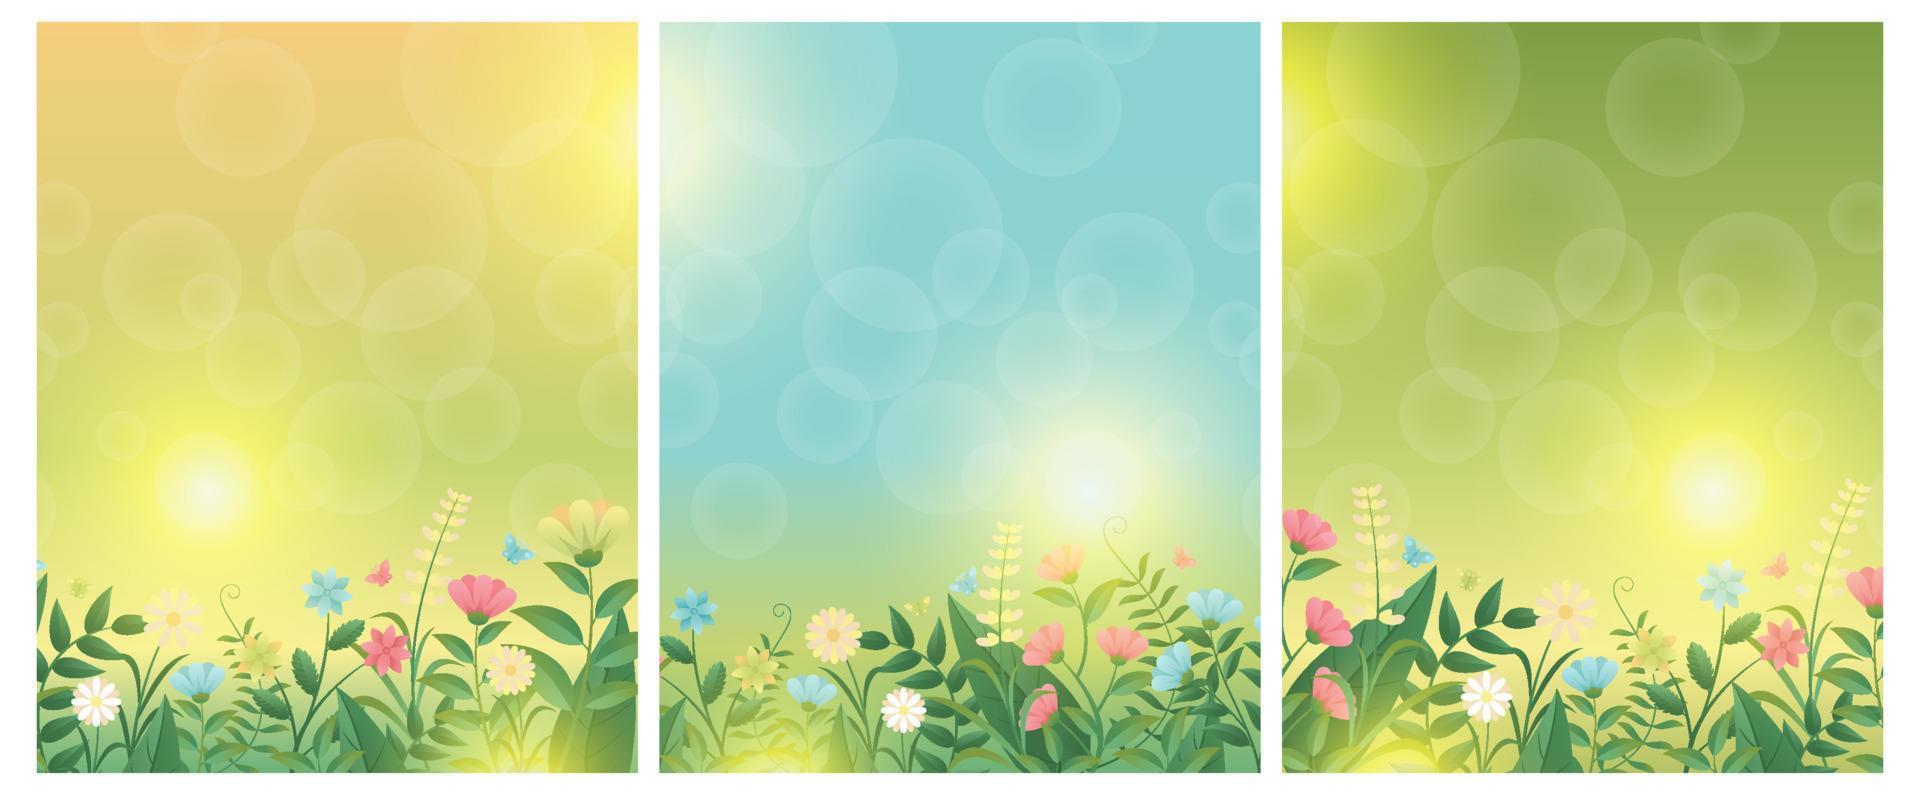 Spring grass and flowers, Easter greeting card decoration element, Park decoration element with spring grass and meadow flowers for spring sale, banner, poster, cover, templates, social media, feed vector